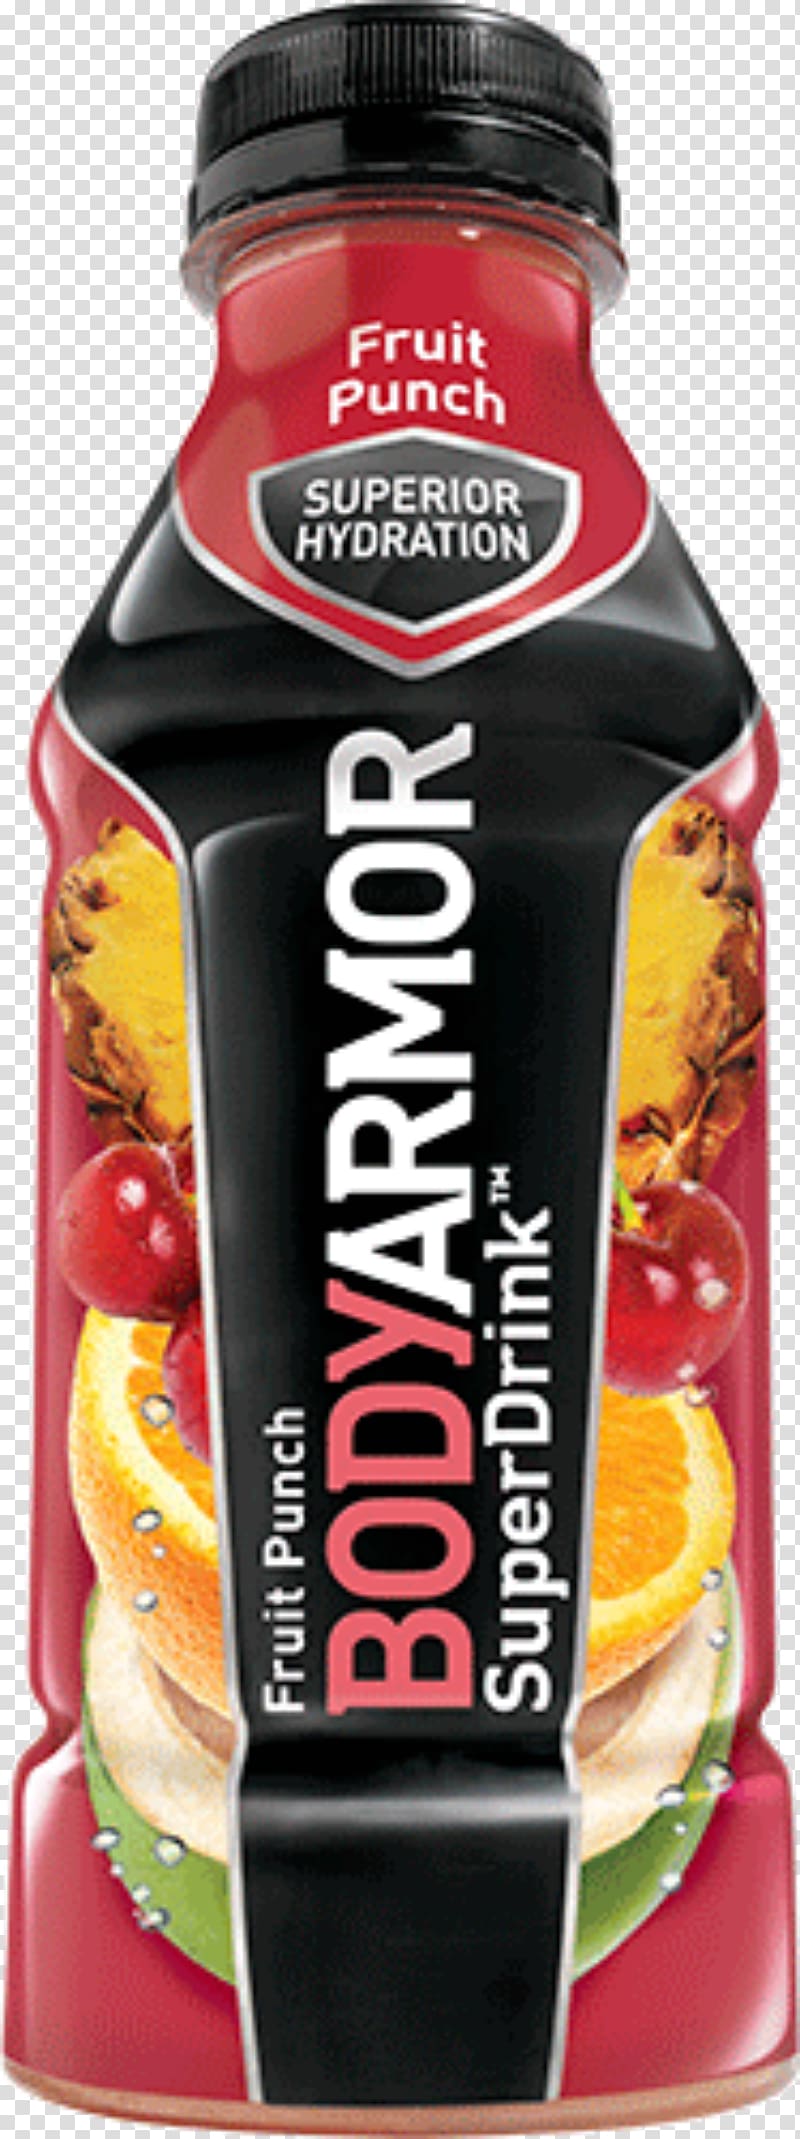 Sports & Energy Drinks Punch Drink mix Coconut water Bodyarmor SuperDrink, punch transparent background PNG clipart